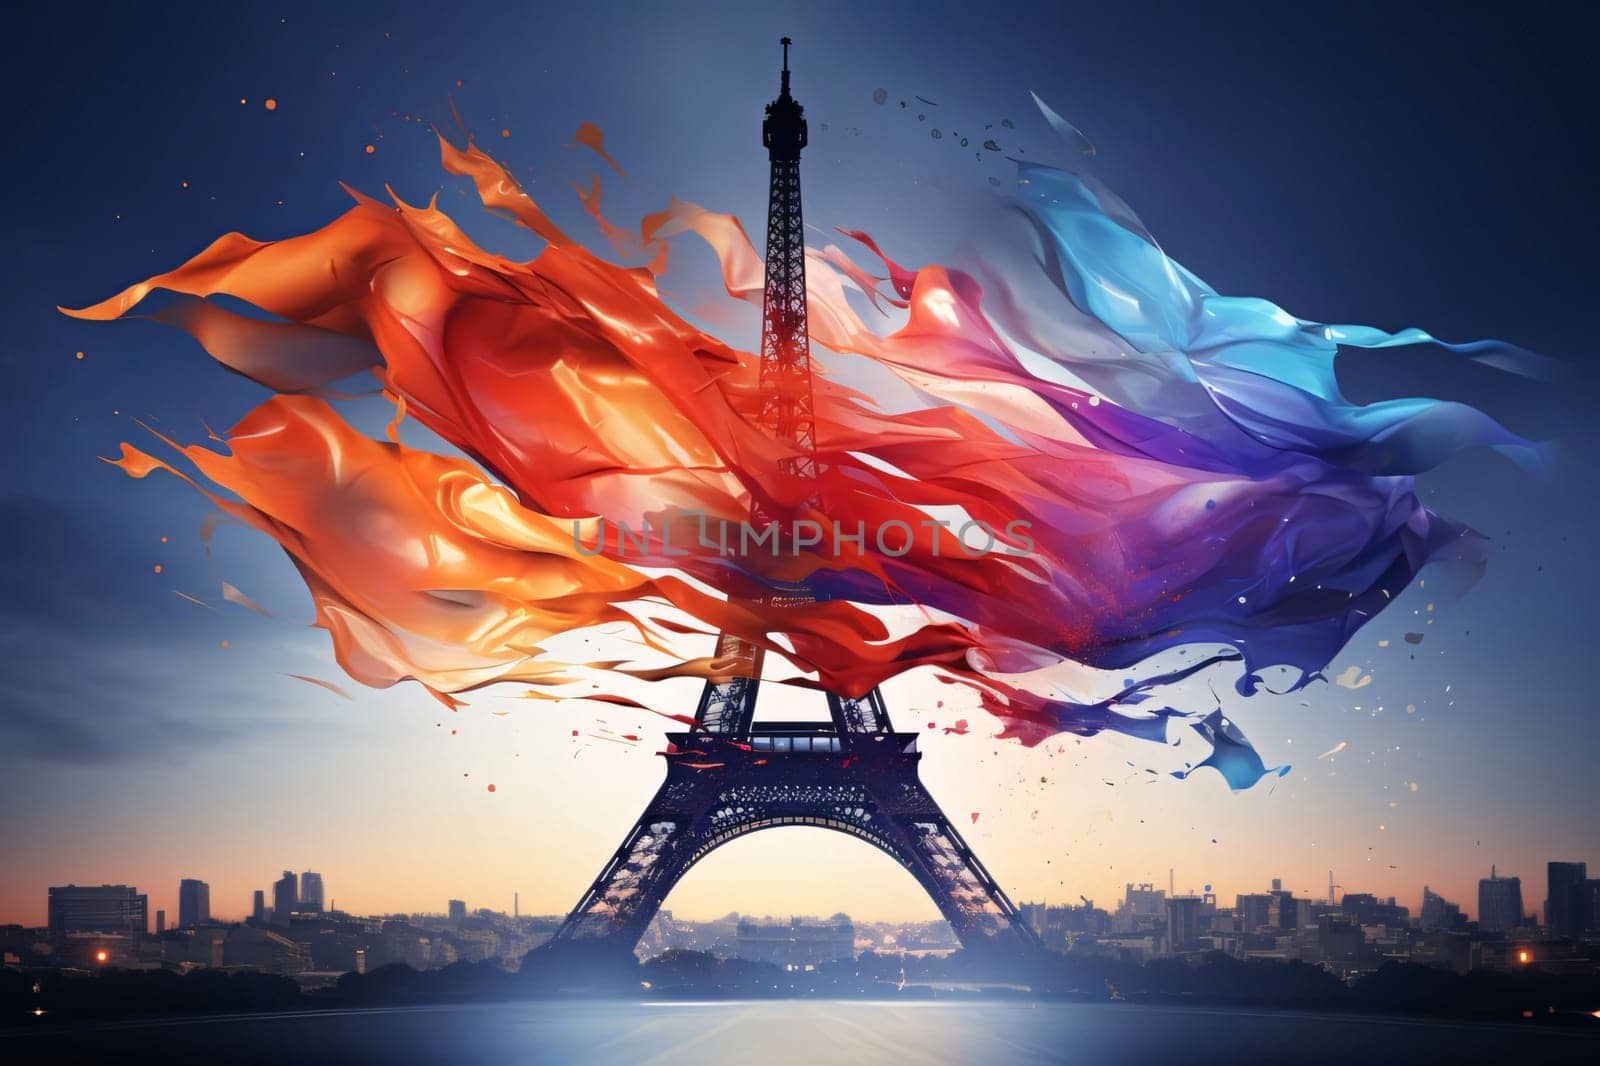 Banner: Flaming Eiffel tower with colorful splashes of water